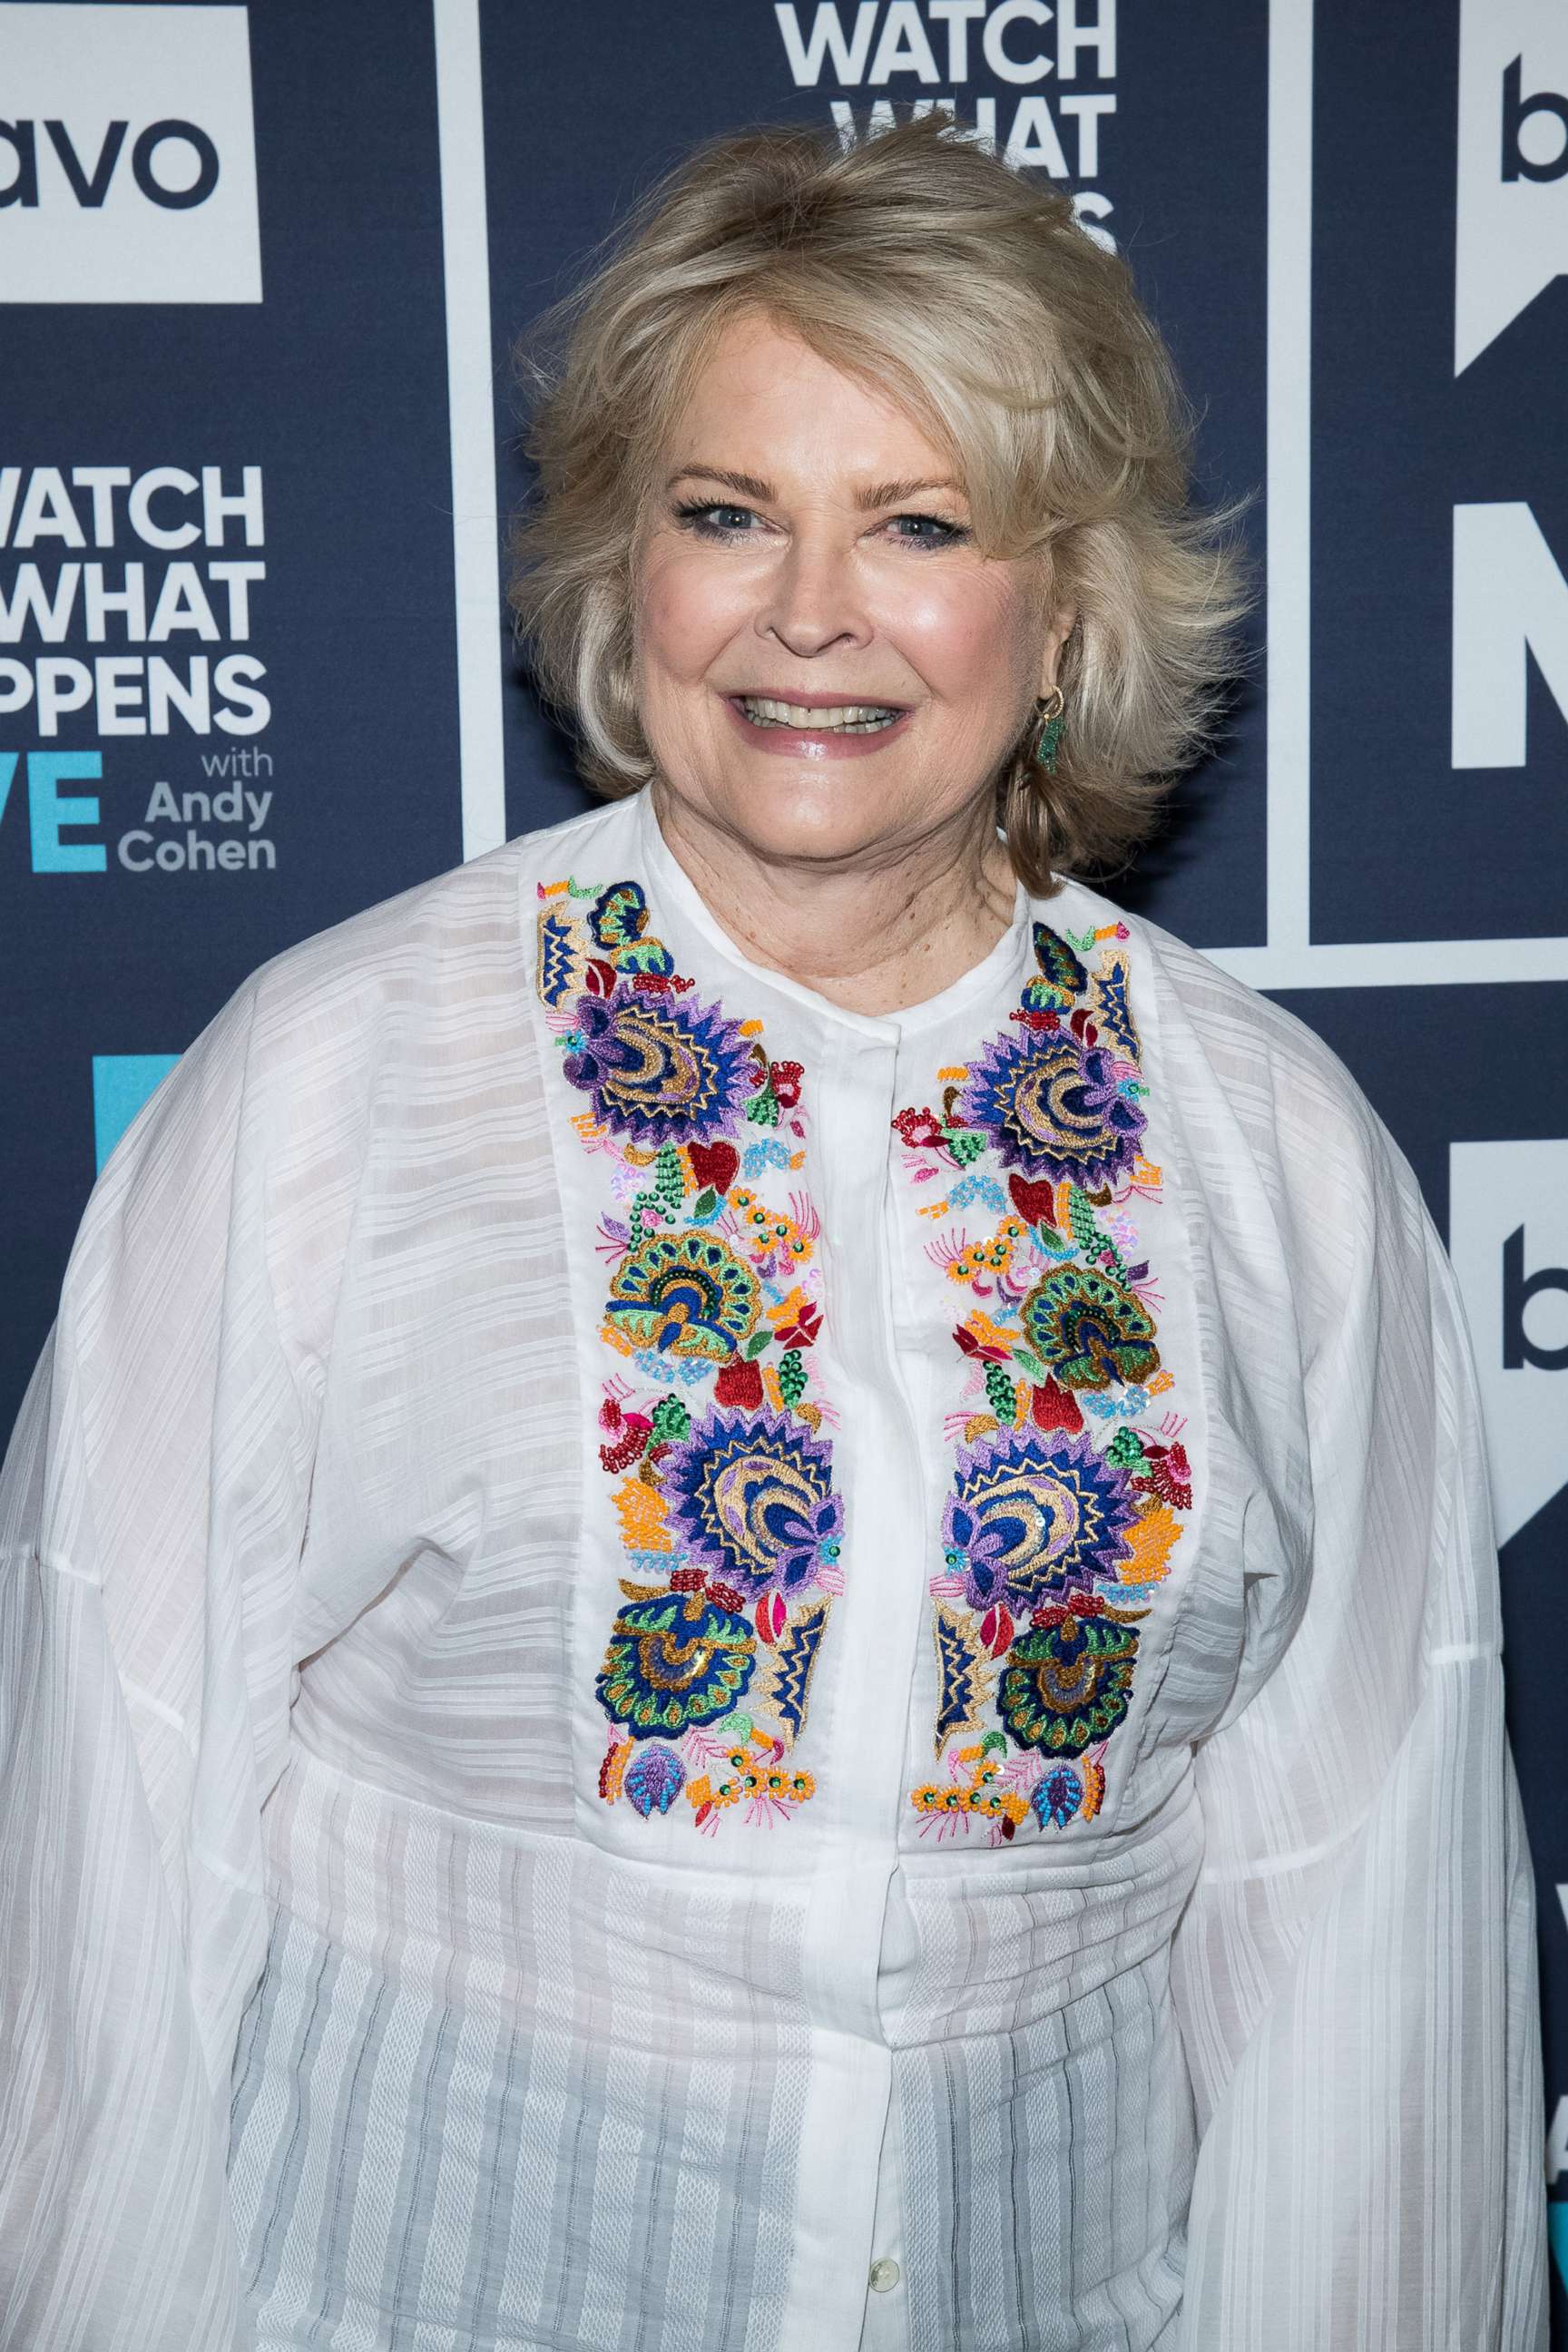 PHOTO: Candice Bergen on an episode of "Watch What Happens Live with Andy Cohen," May 14, 2018.